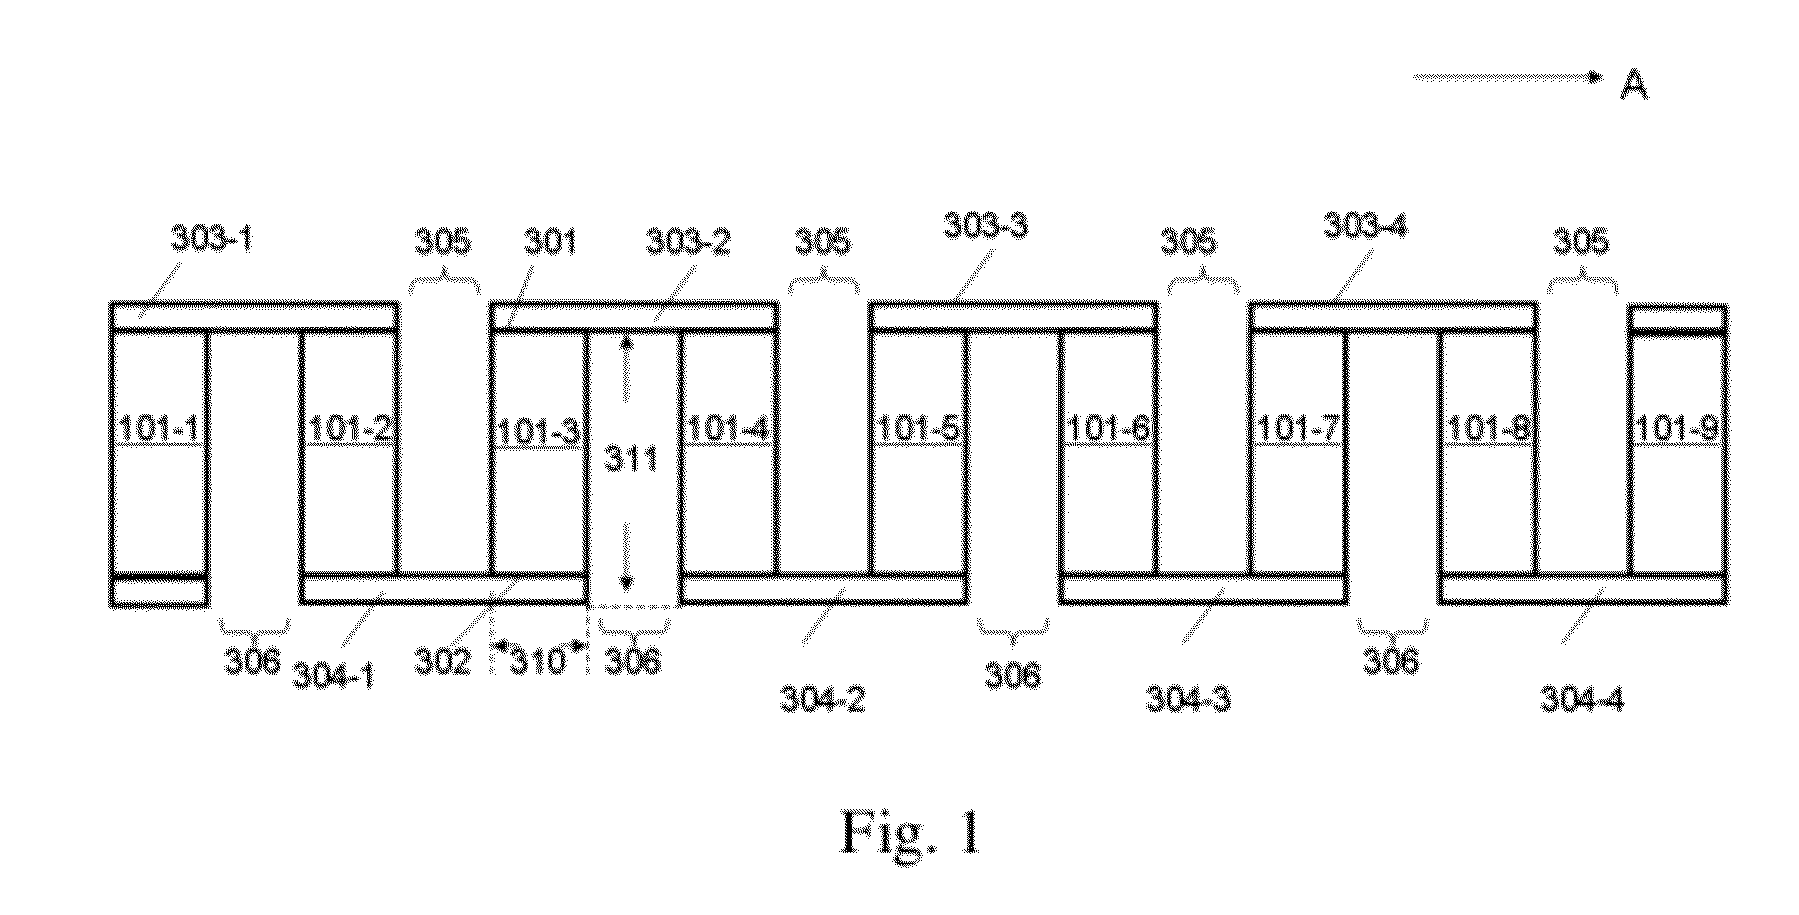 Substrate structure for semiconductor device fabrication and method for fabricating the same